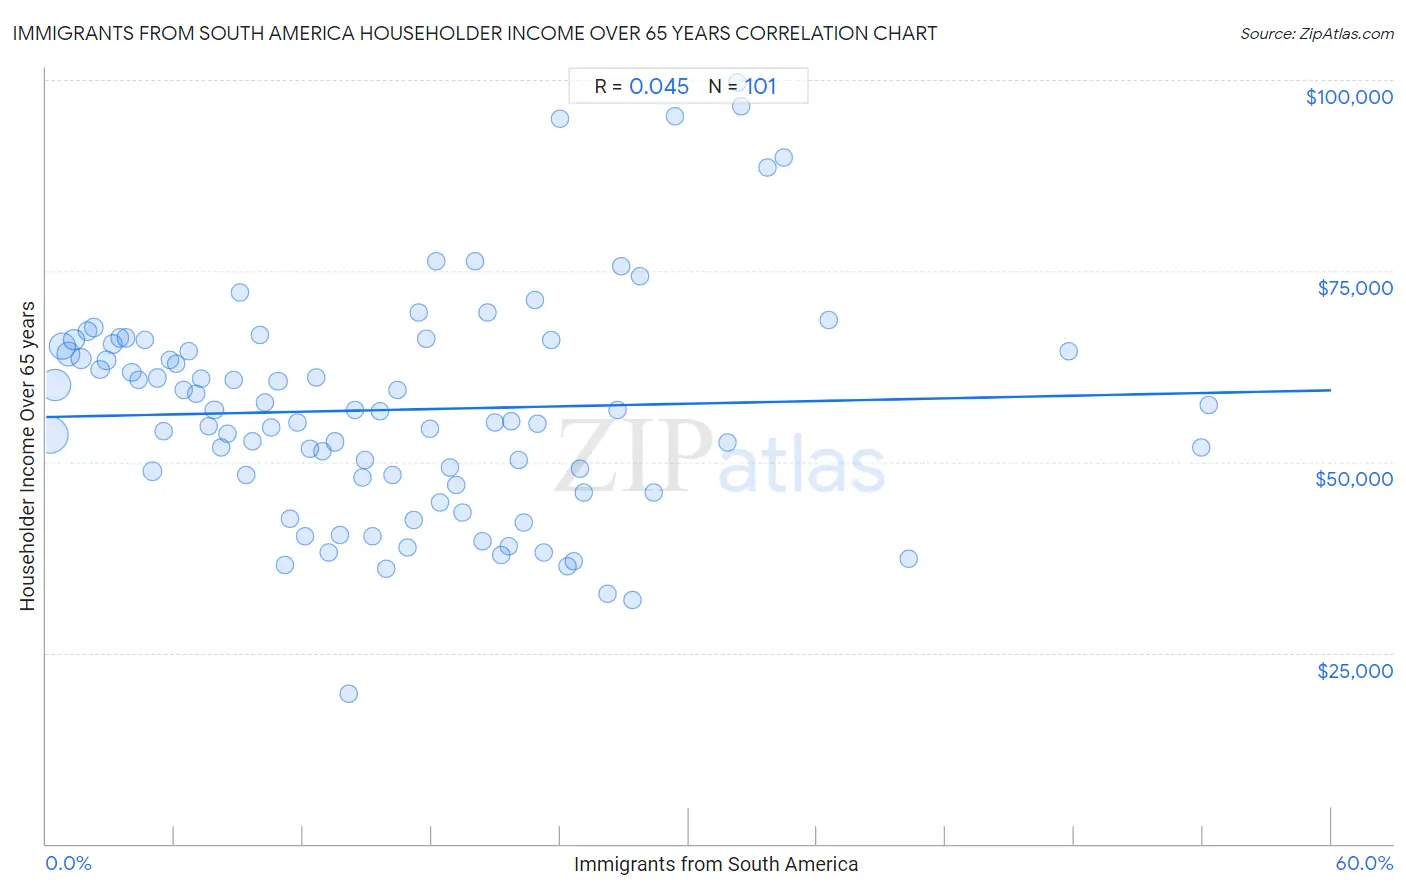 Immigrants from South America Householder Income Over 65 years